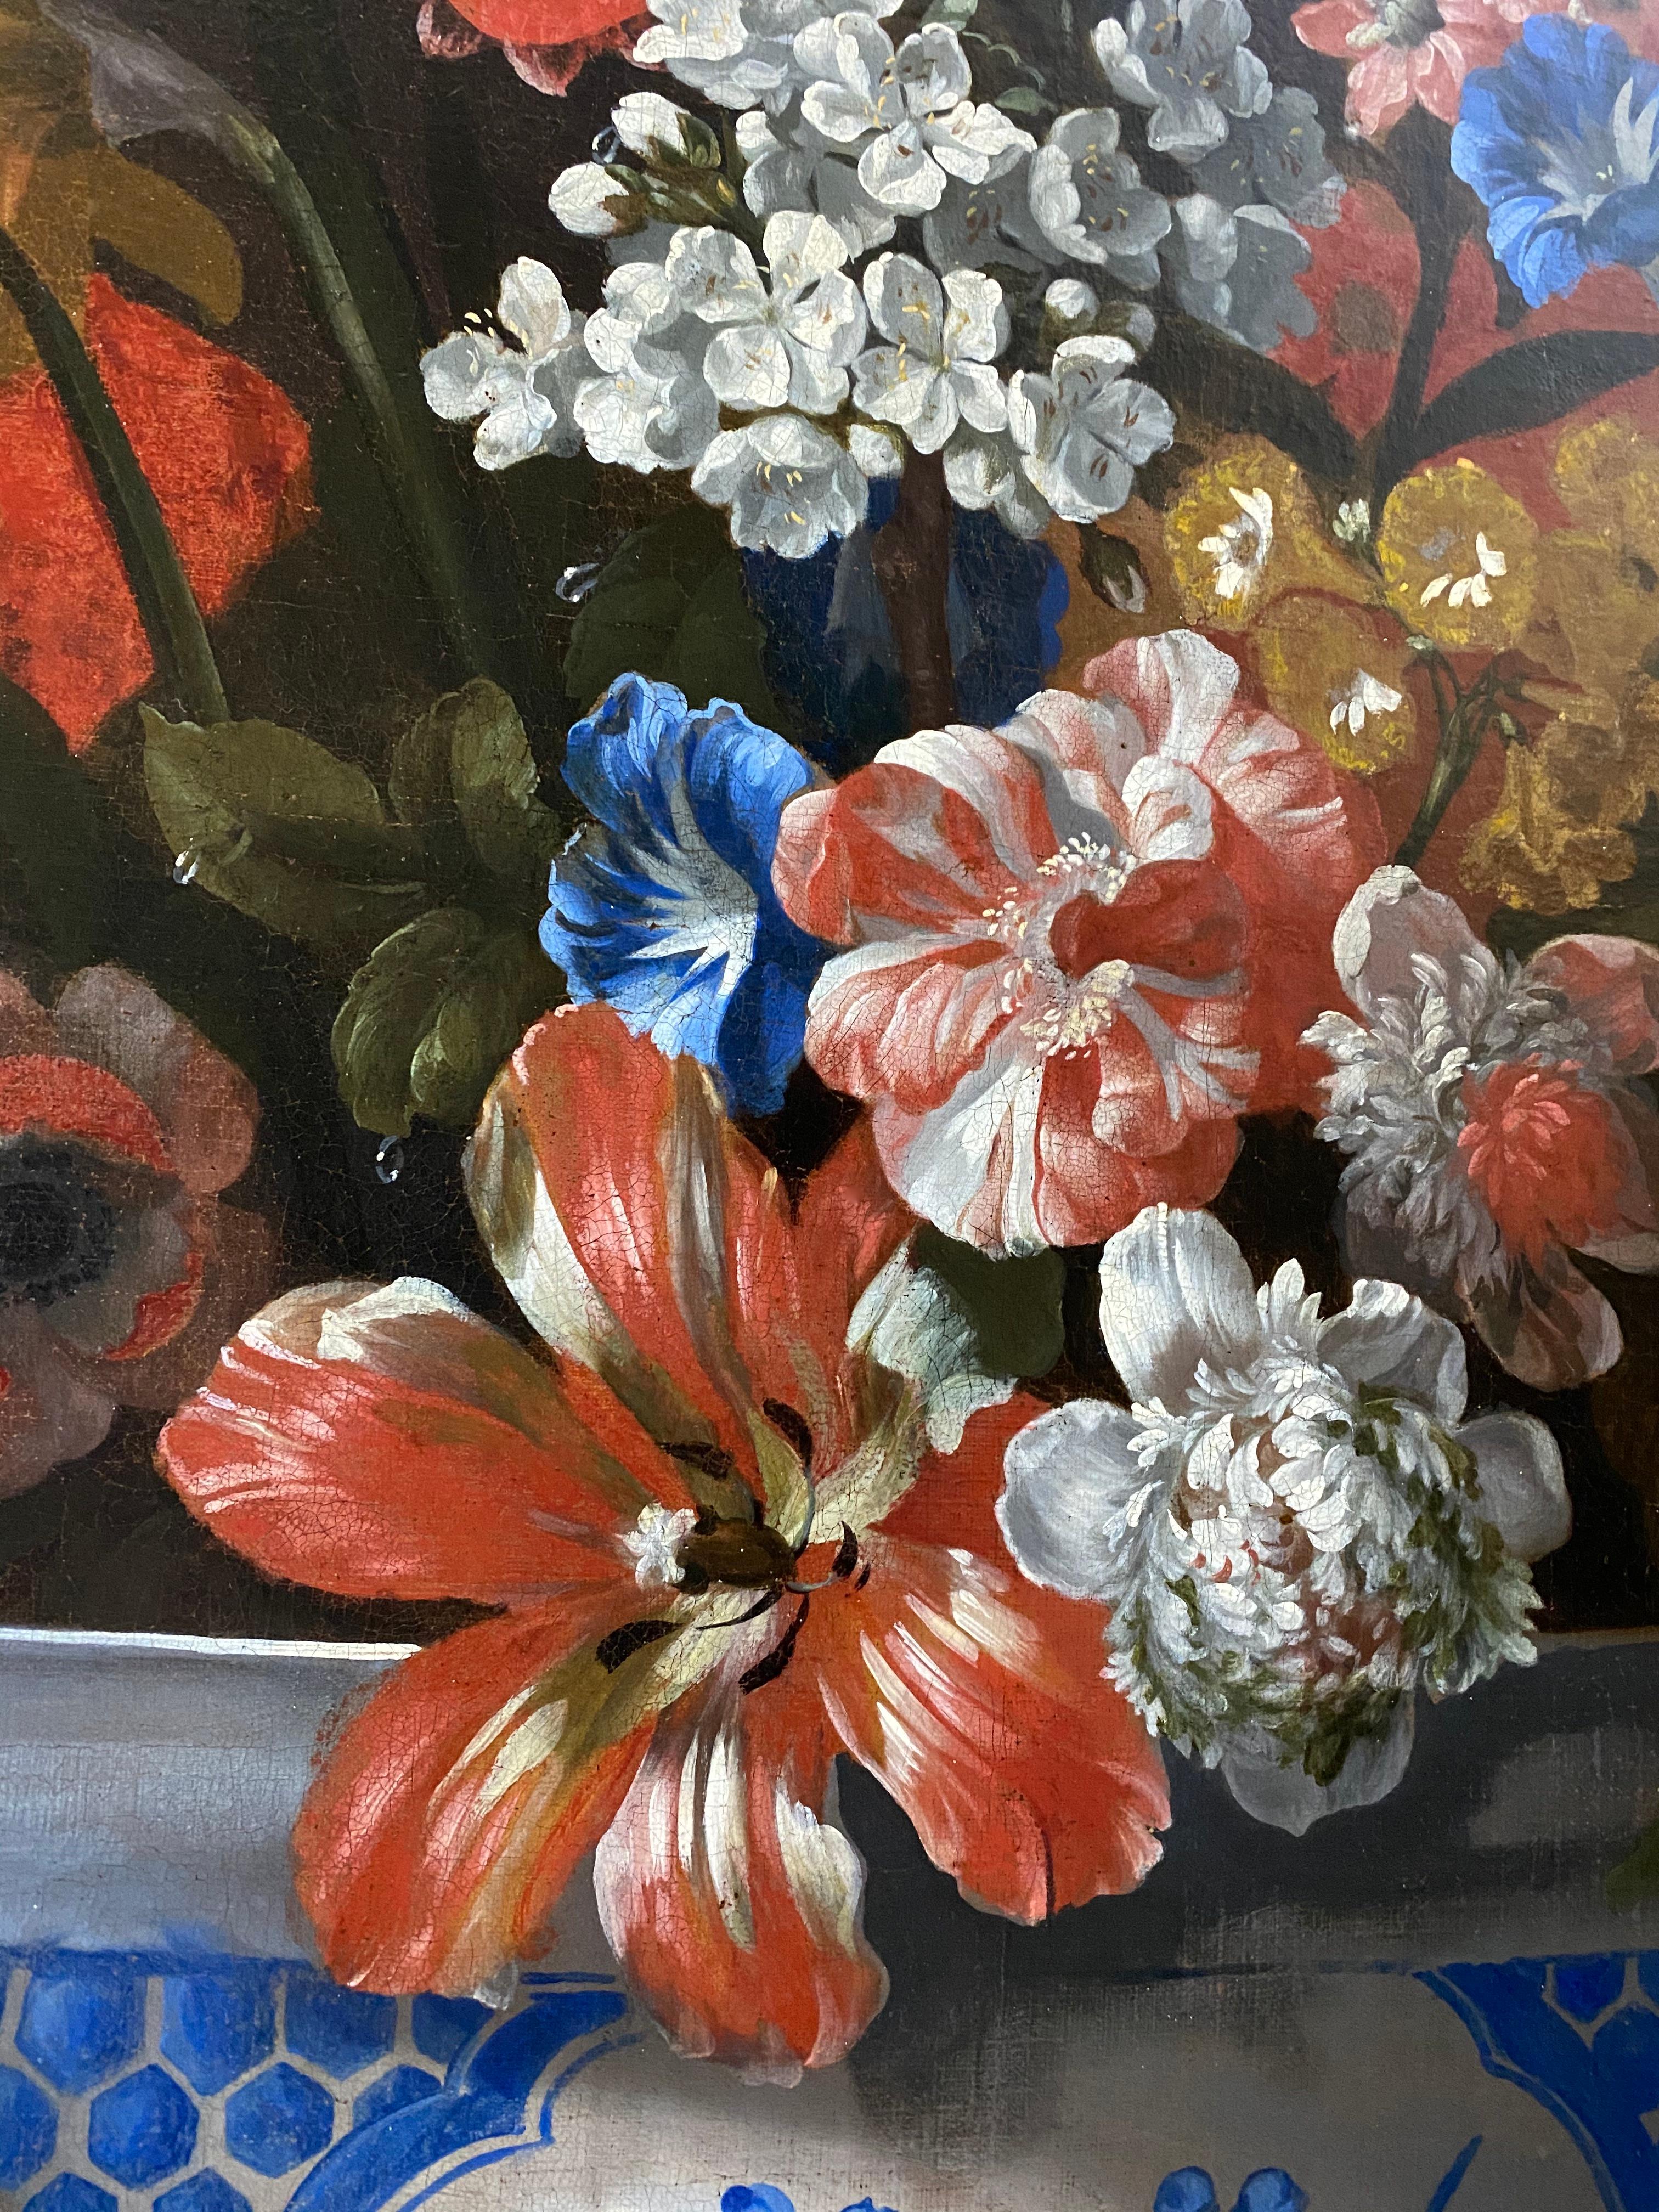 18TH CENTURY DUTCH FLORAL STILL LIFE WITH A CHINESE BOWL AND ORANGE DRAPERY - Black Interior Painting by Pieter Casteels III